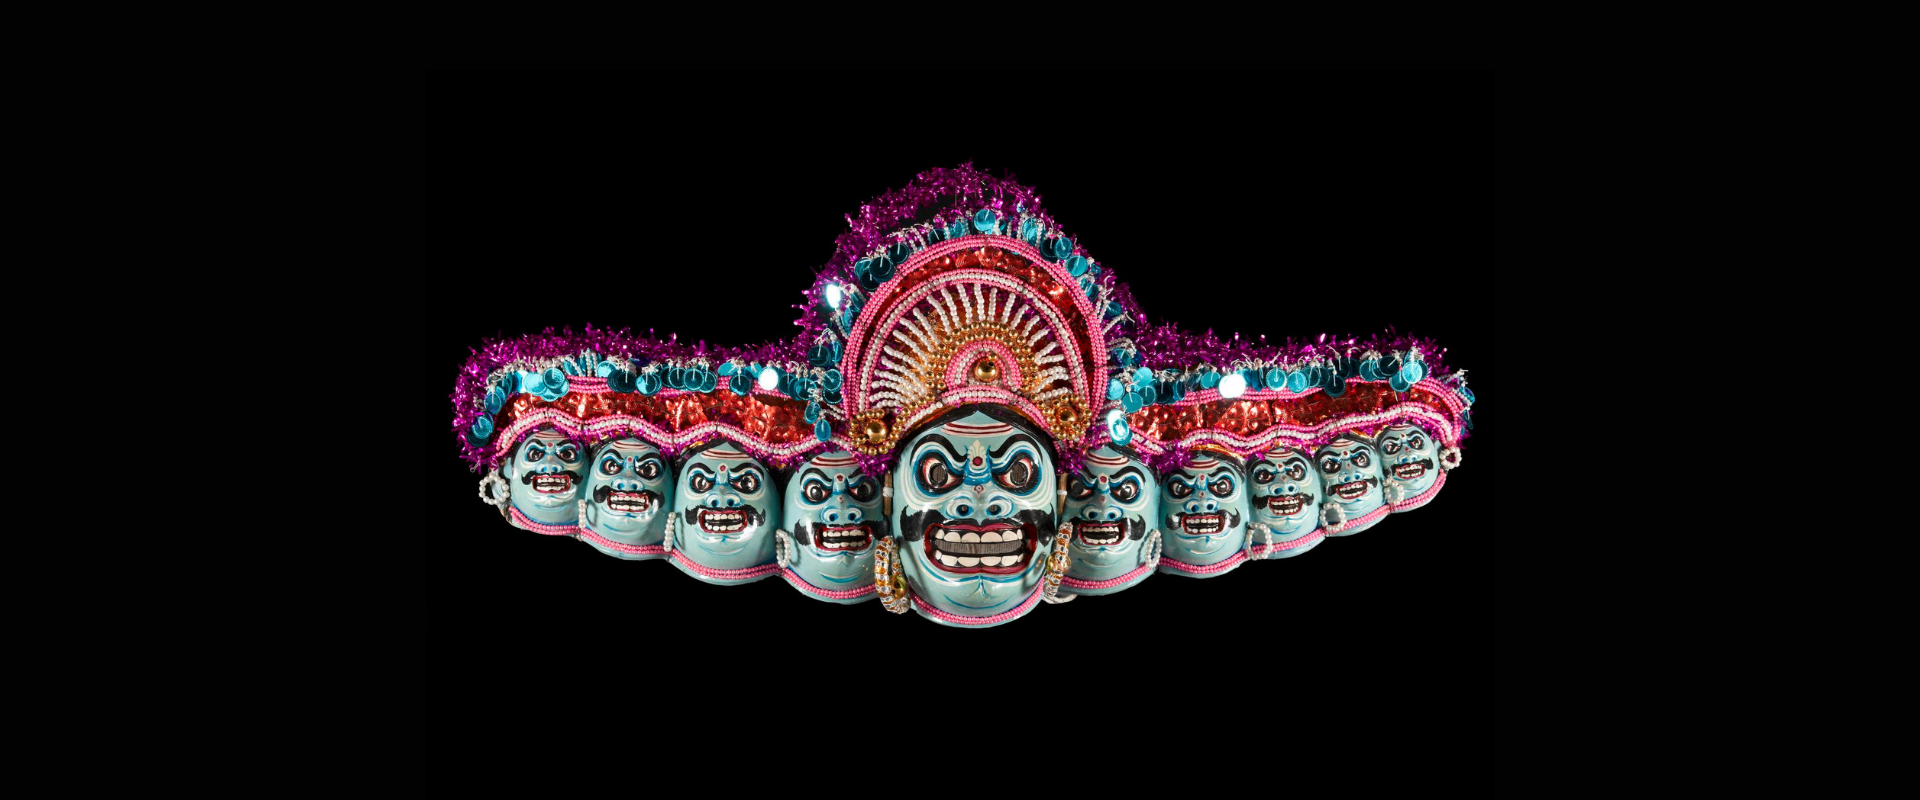 Ten headed papier-mache mask of the demon king Ravana, part of a Chhou dance costume, painted in blues, red, white and black and decorated with beads, sequins and tinsel: India, Bengal, Purulia District, by Nepal Chandra Sutradhar.